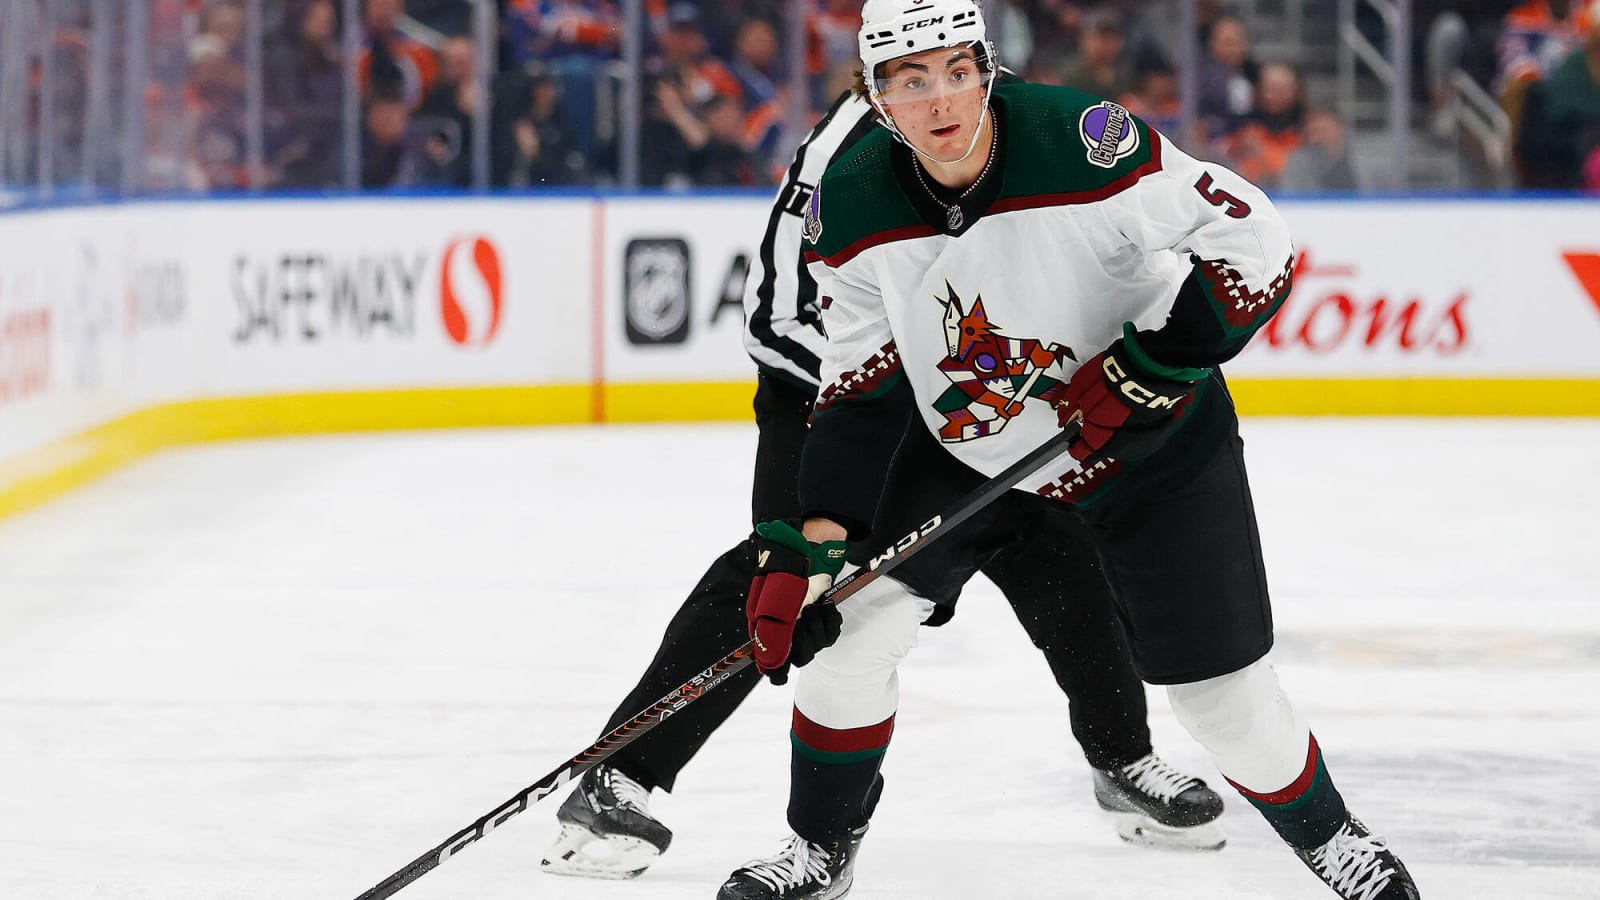 Does Michael Kesselring Deserve More Playing Time with Coyotes?